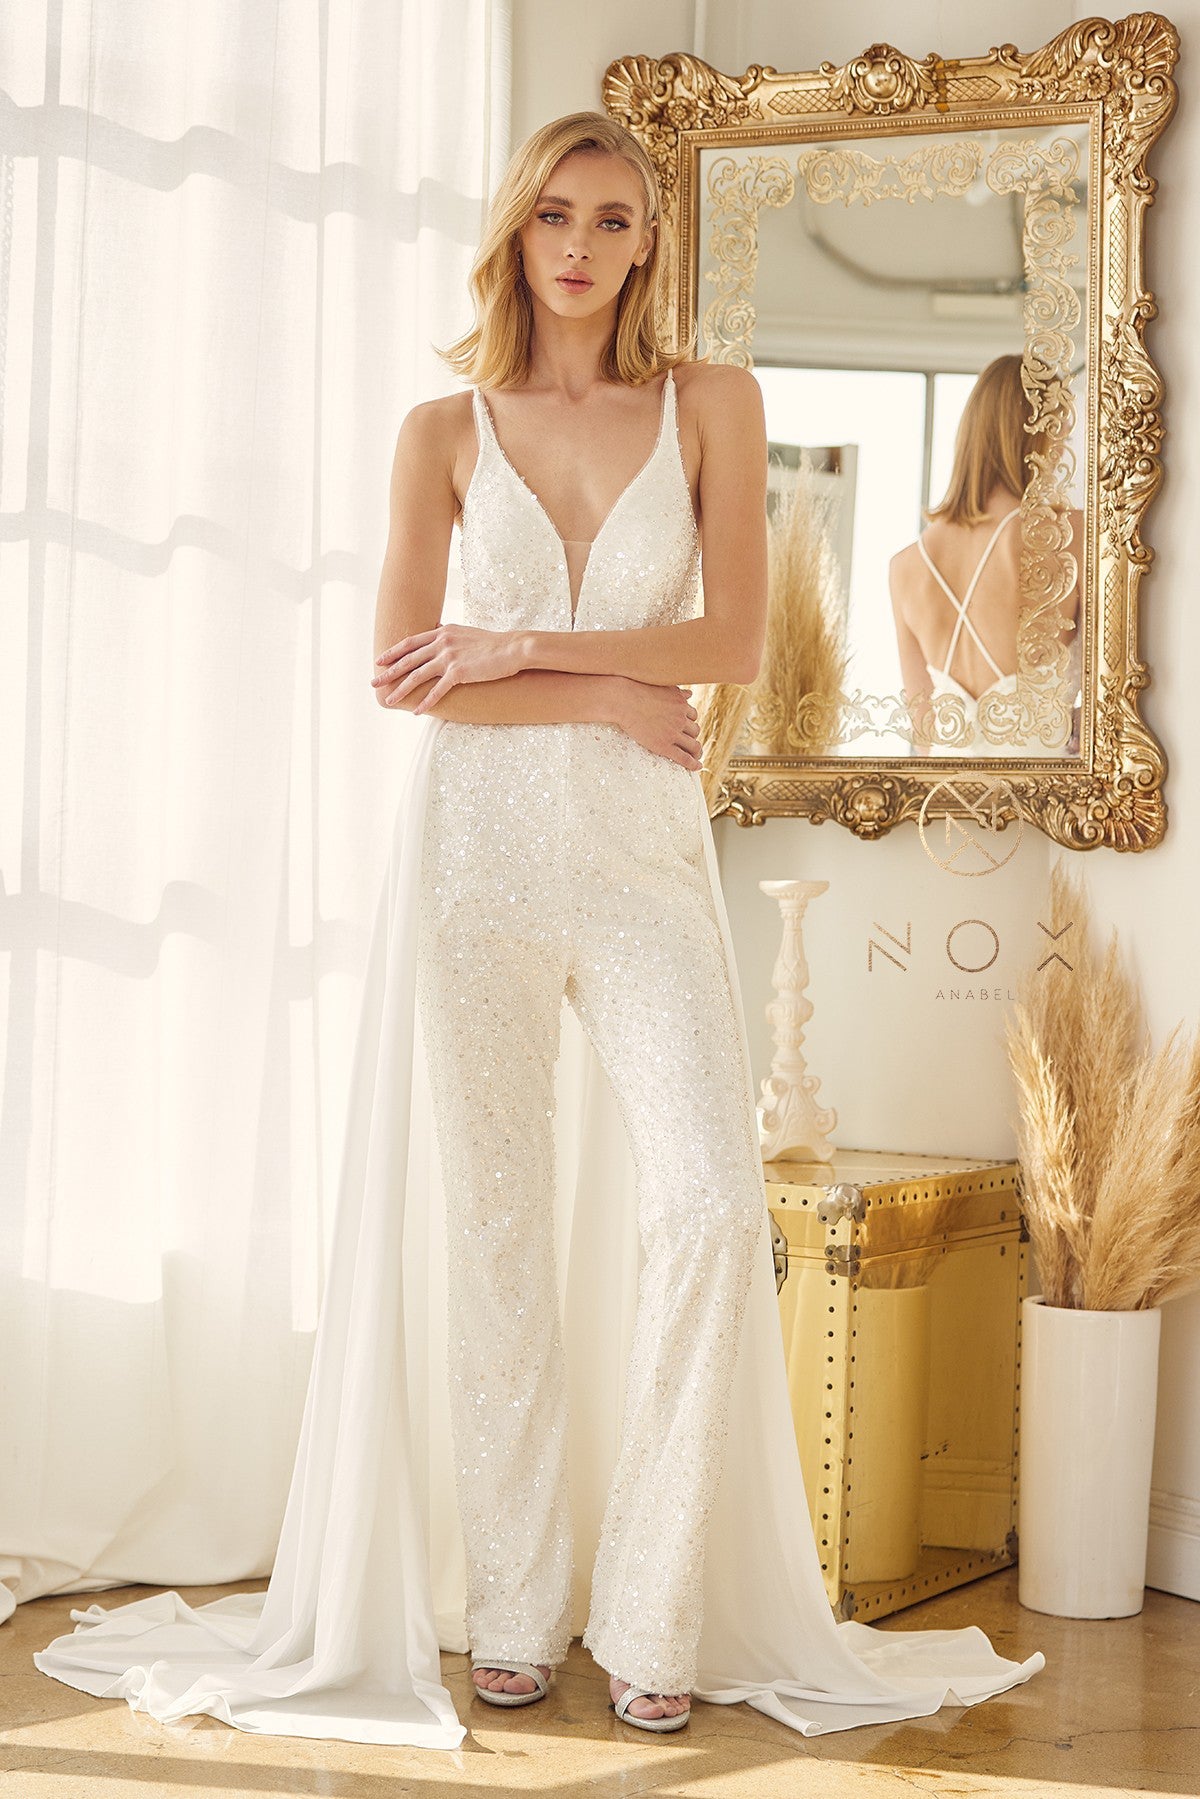 Nox Anabel JE926 Sequin & Pearl Embellished Bridal V Neck Jumpsuit with detachable  Overskirt. Pockets in the pant legs. This Wedding Pant suit has a PLUNGING NECKLINE WITH BEADING DETAILS IN JUMPSUIT WITH A CAPE FROM WAIST. Great for receptions!  Available Sizes: 2-16  Available Colors: White